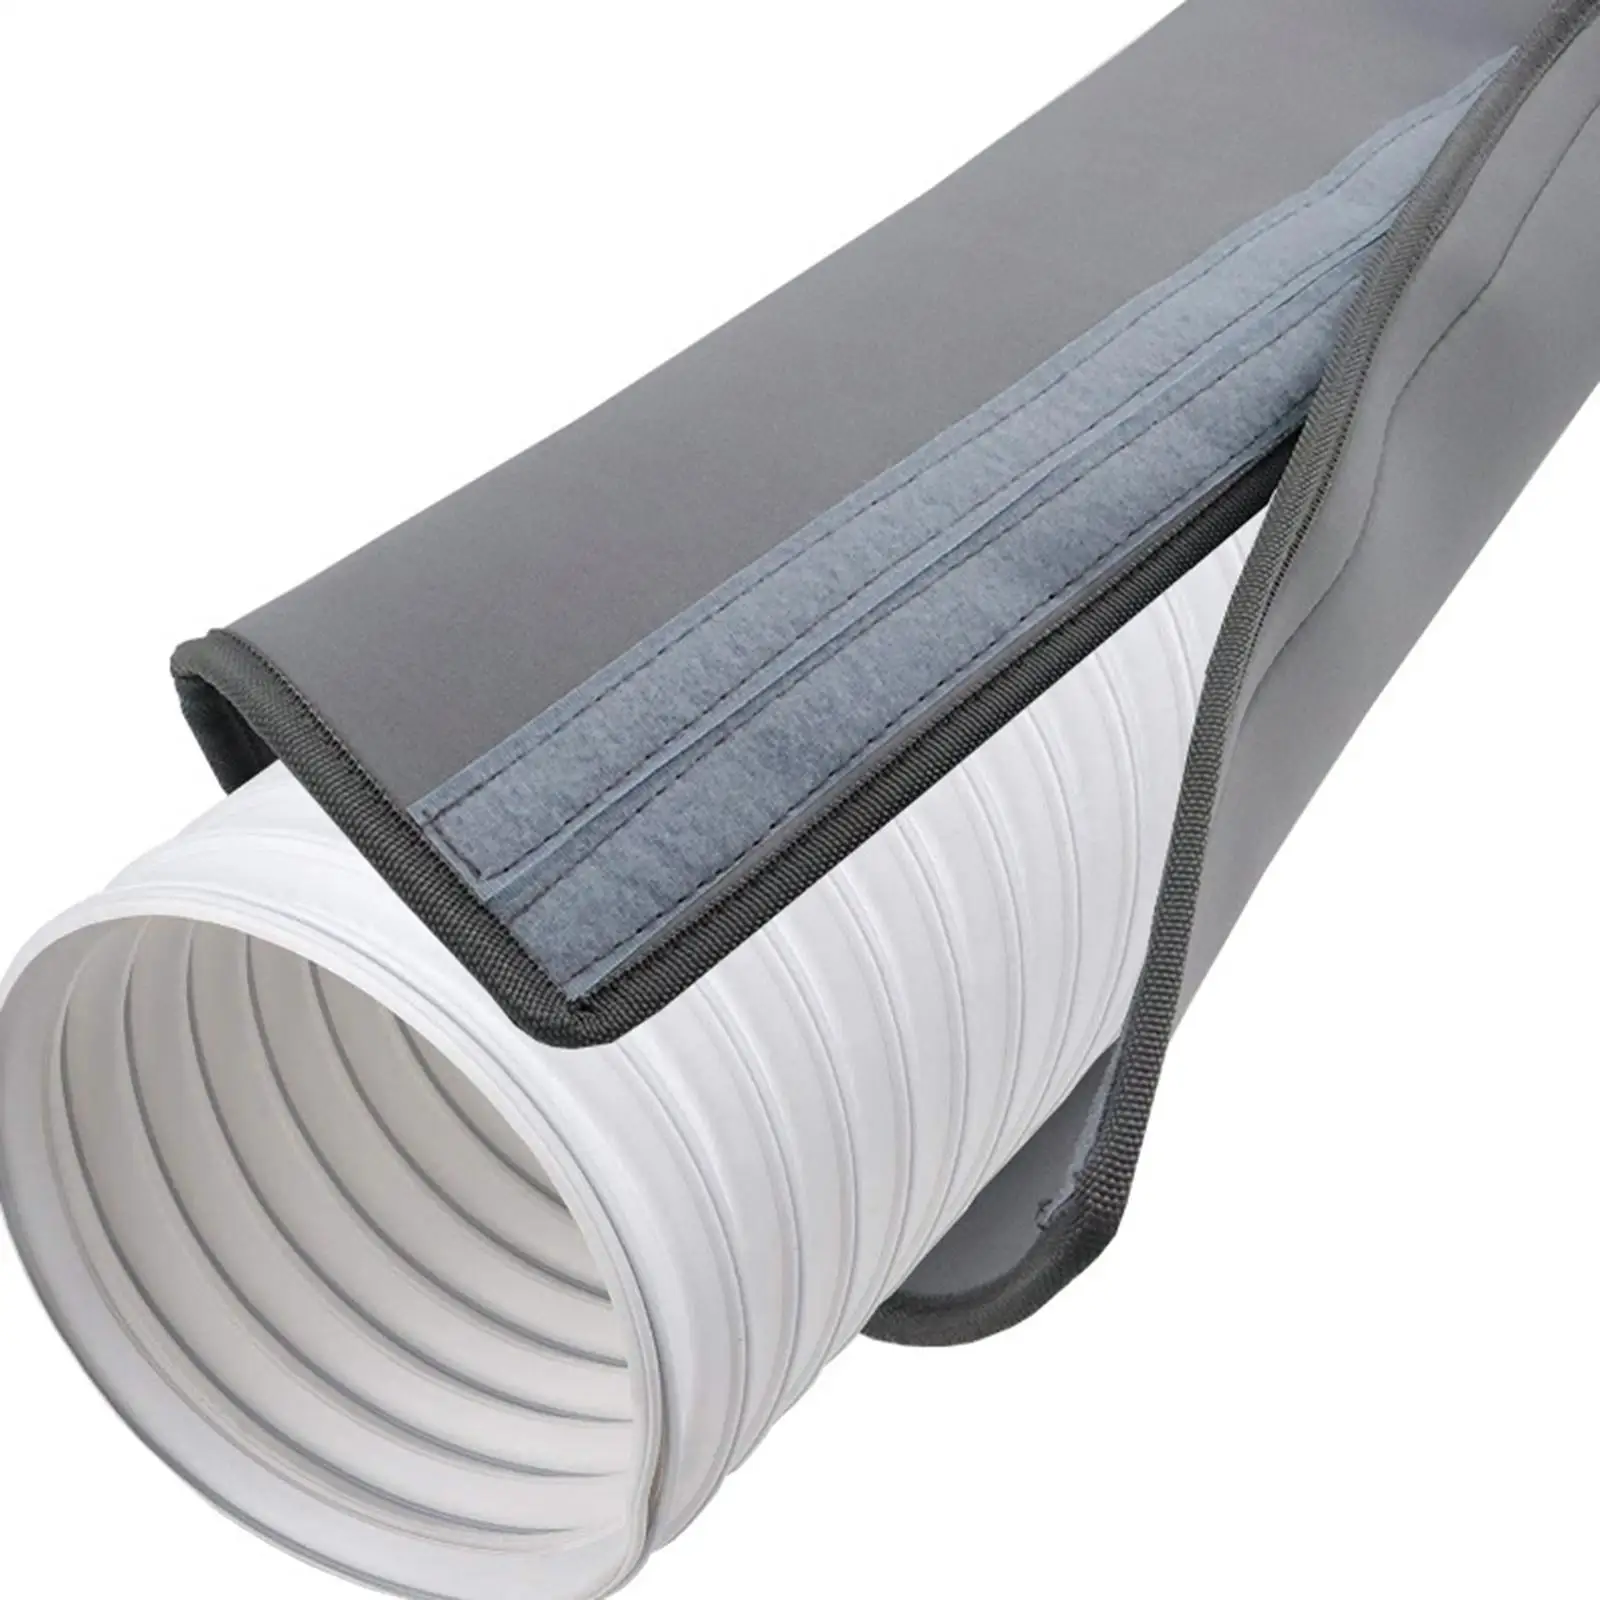 Air Conditioner Hose Wrap Cover for 5 inch 6 inch Tube Diameter for Outlet Pipe Tube Exhaust Duct Vent